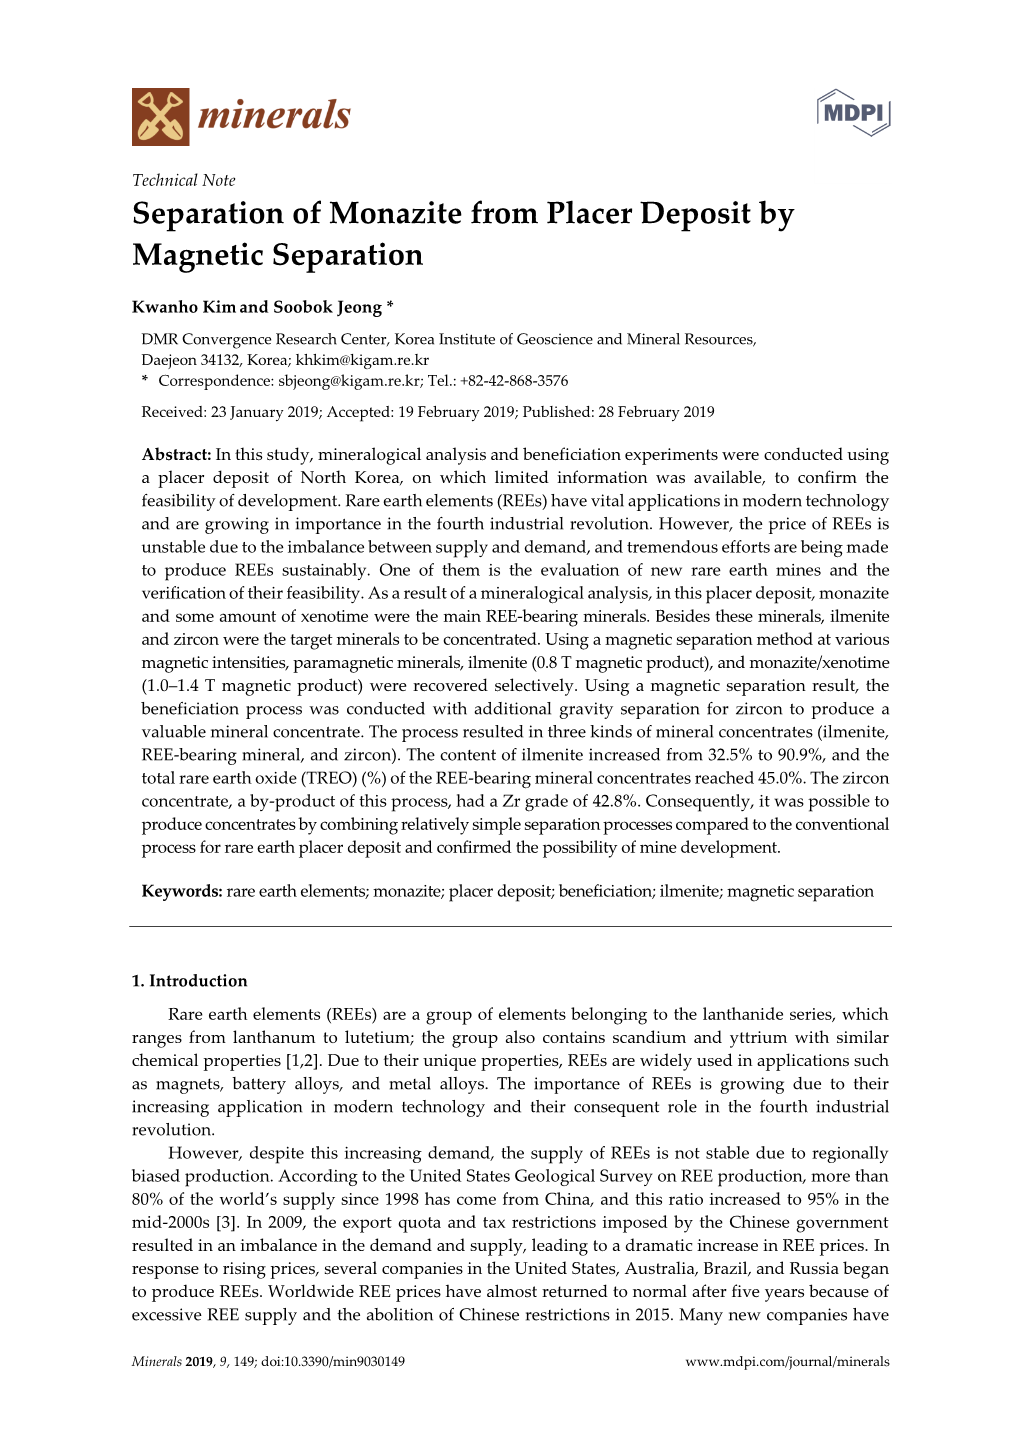 Separation of Monazite from Placer Deposit by Magnetic Separation